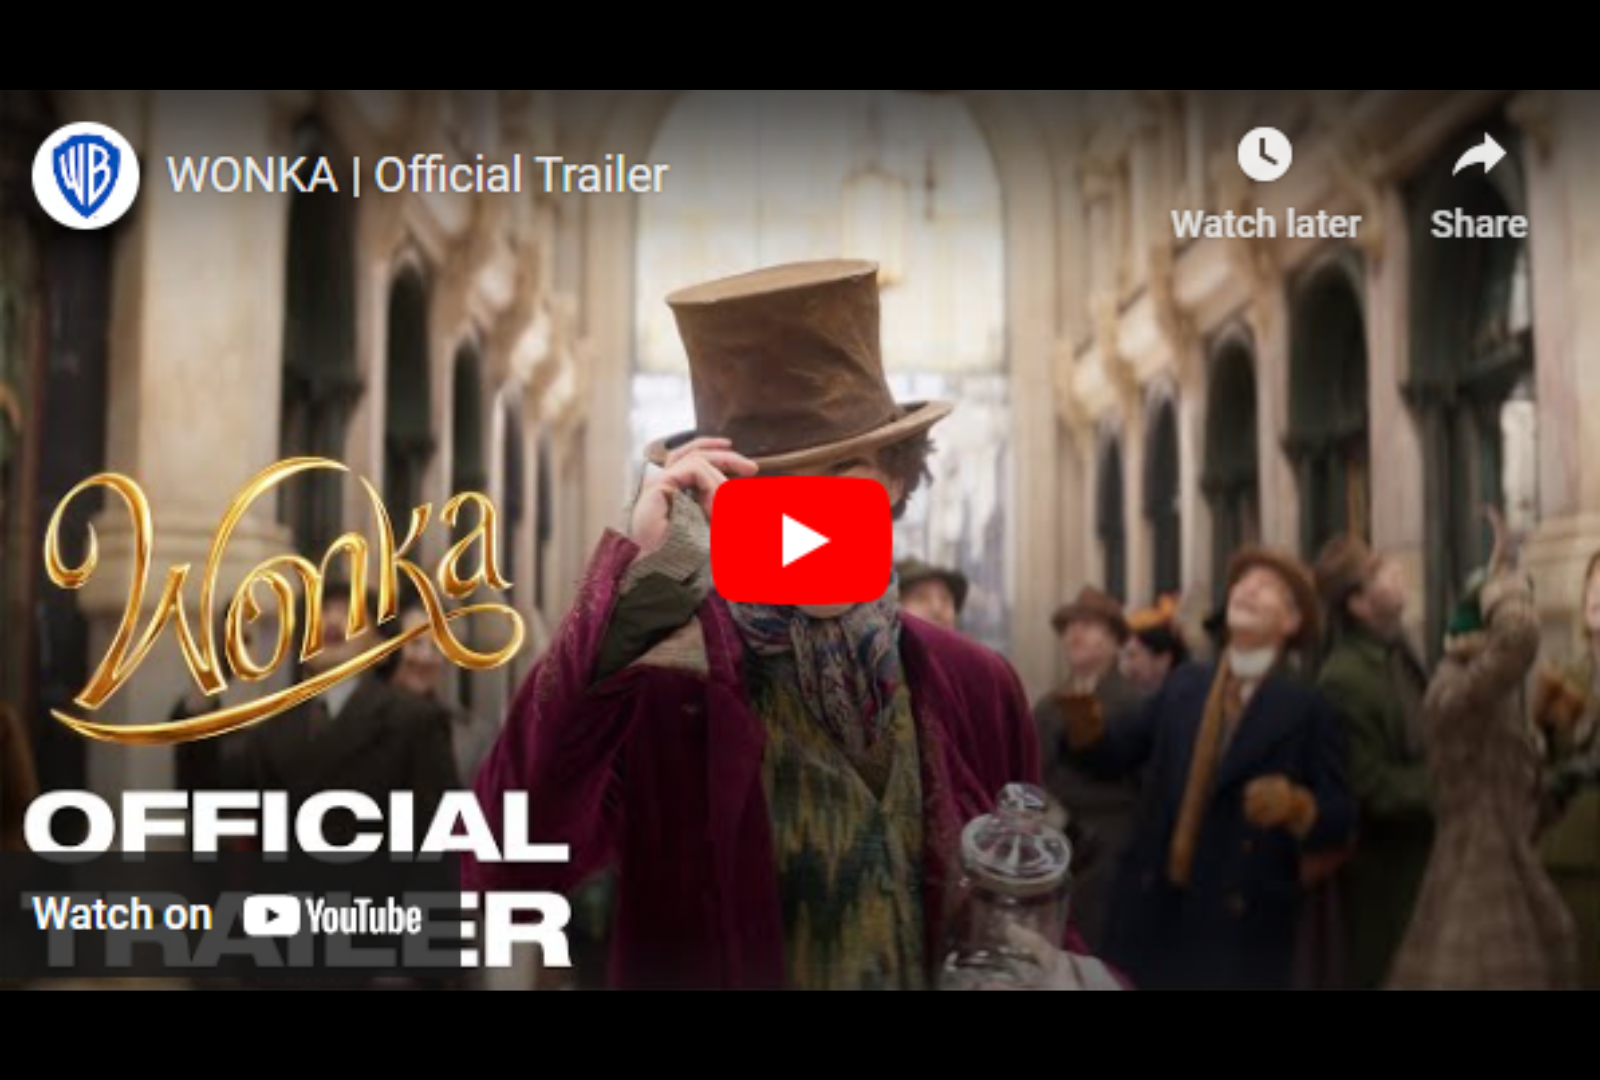 The WONKA Trailer Is HERE!